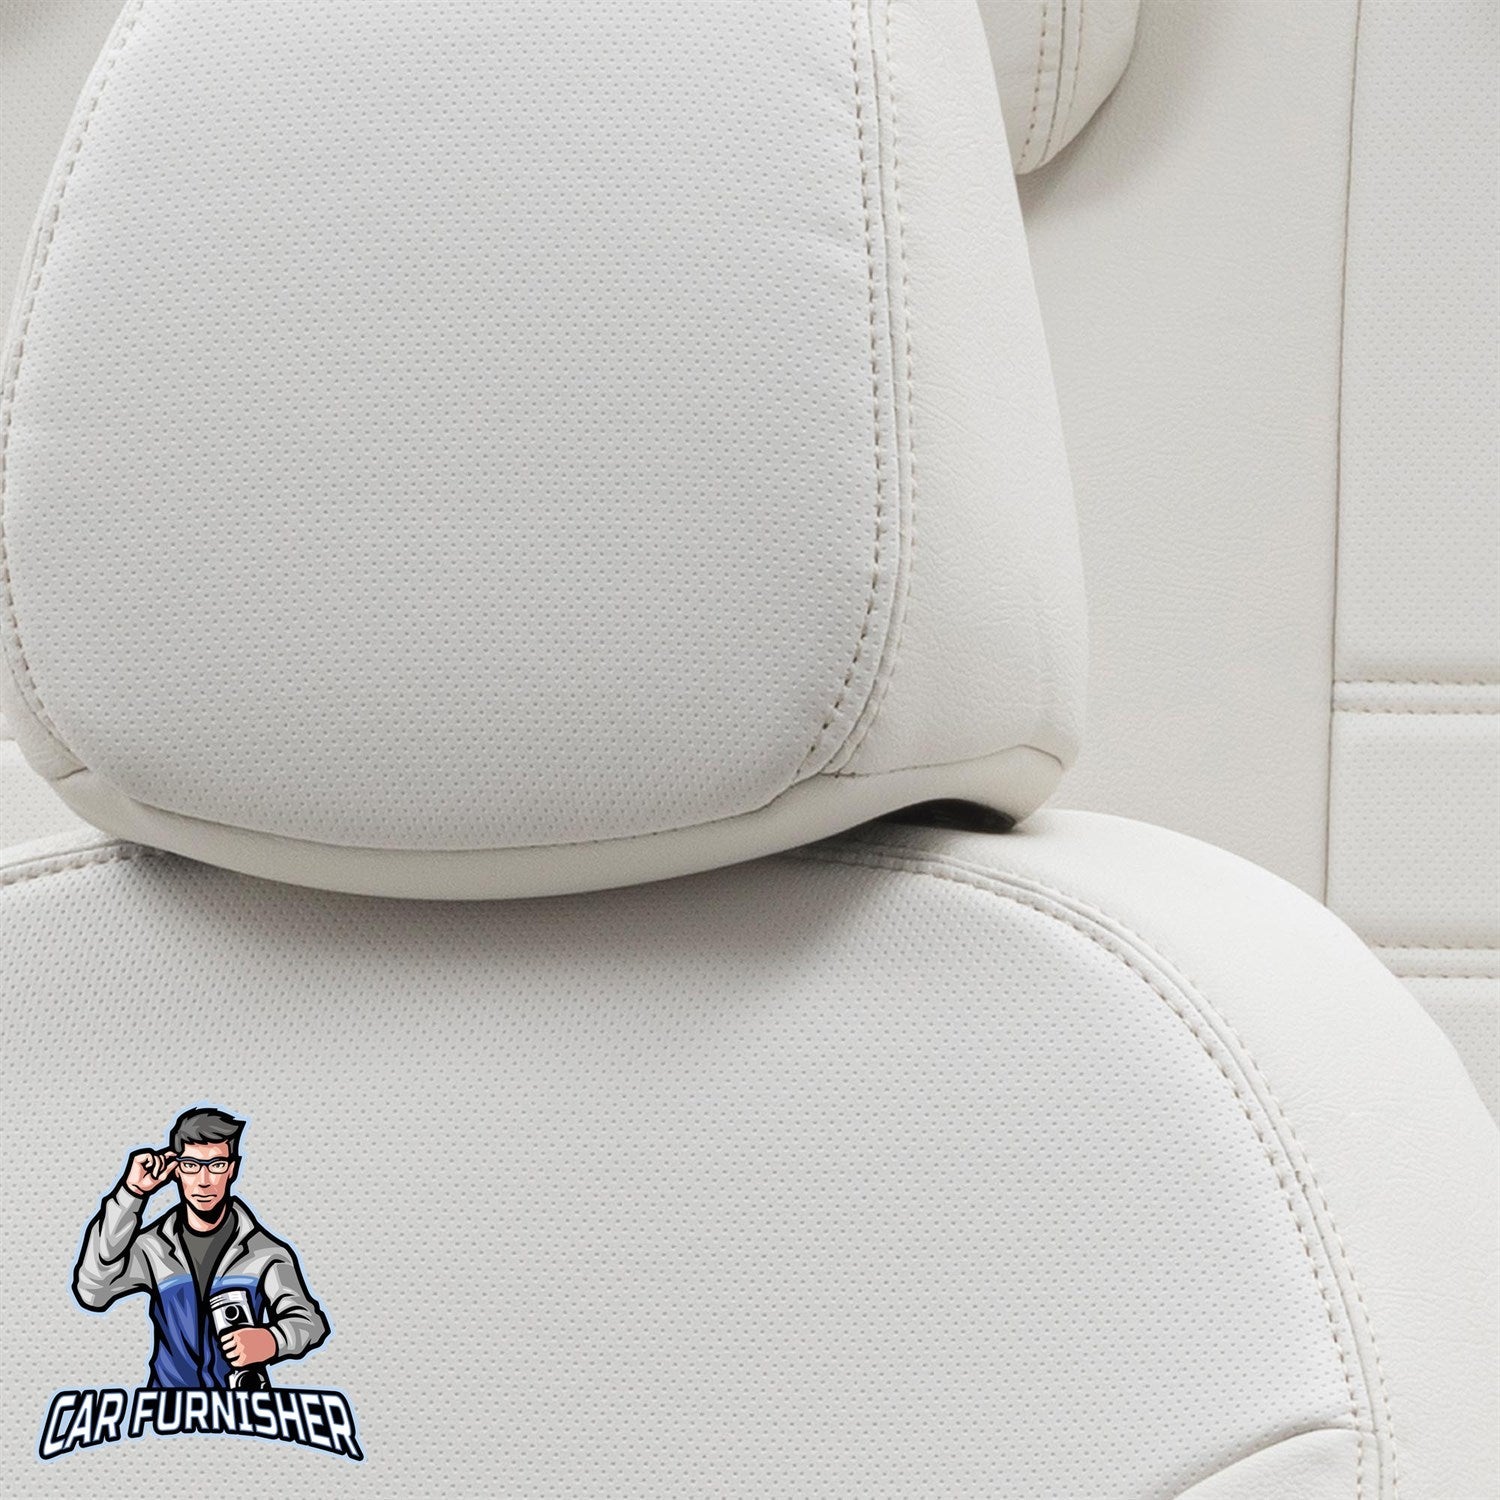 Mercedes ML Seat Covers Istanbul Leather Design Ivory Leather